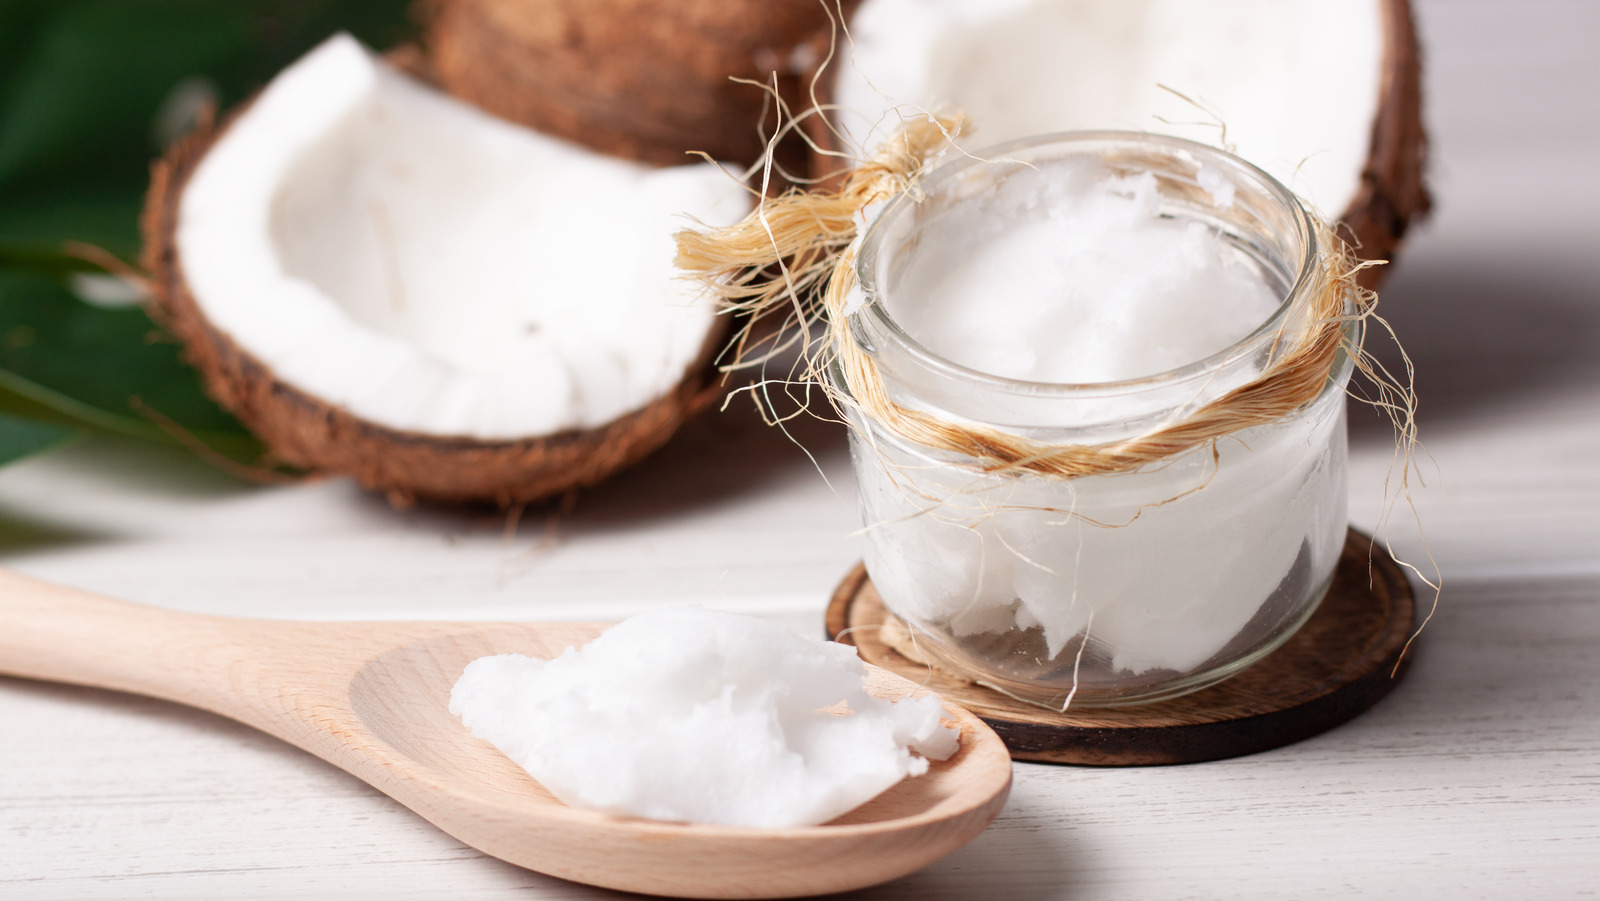 The Easy Way to Measure Coconut Oil (or any solid type oil you may